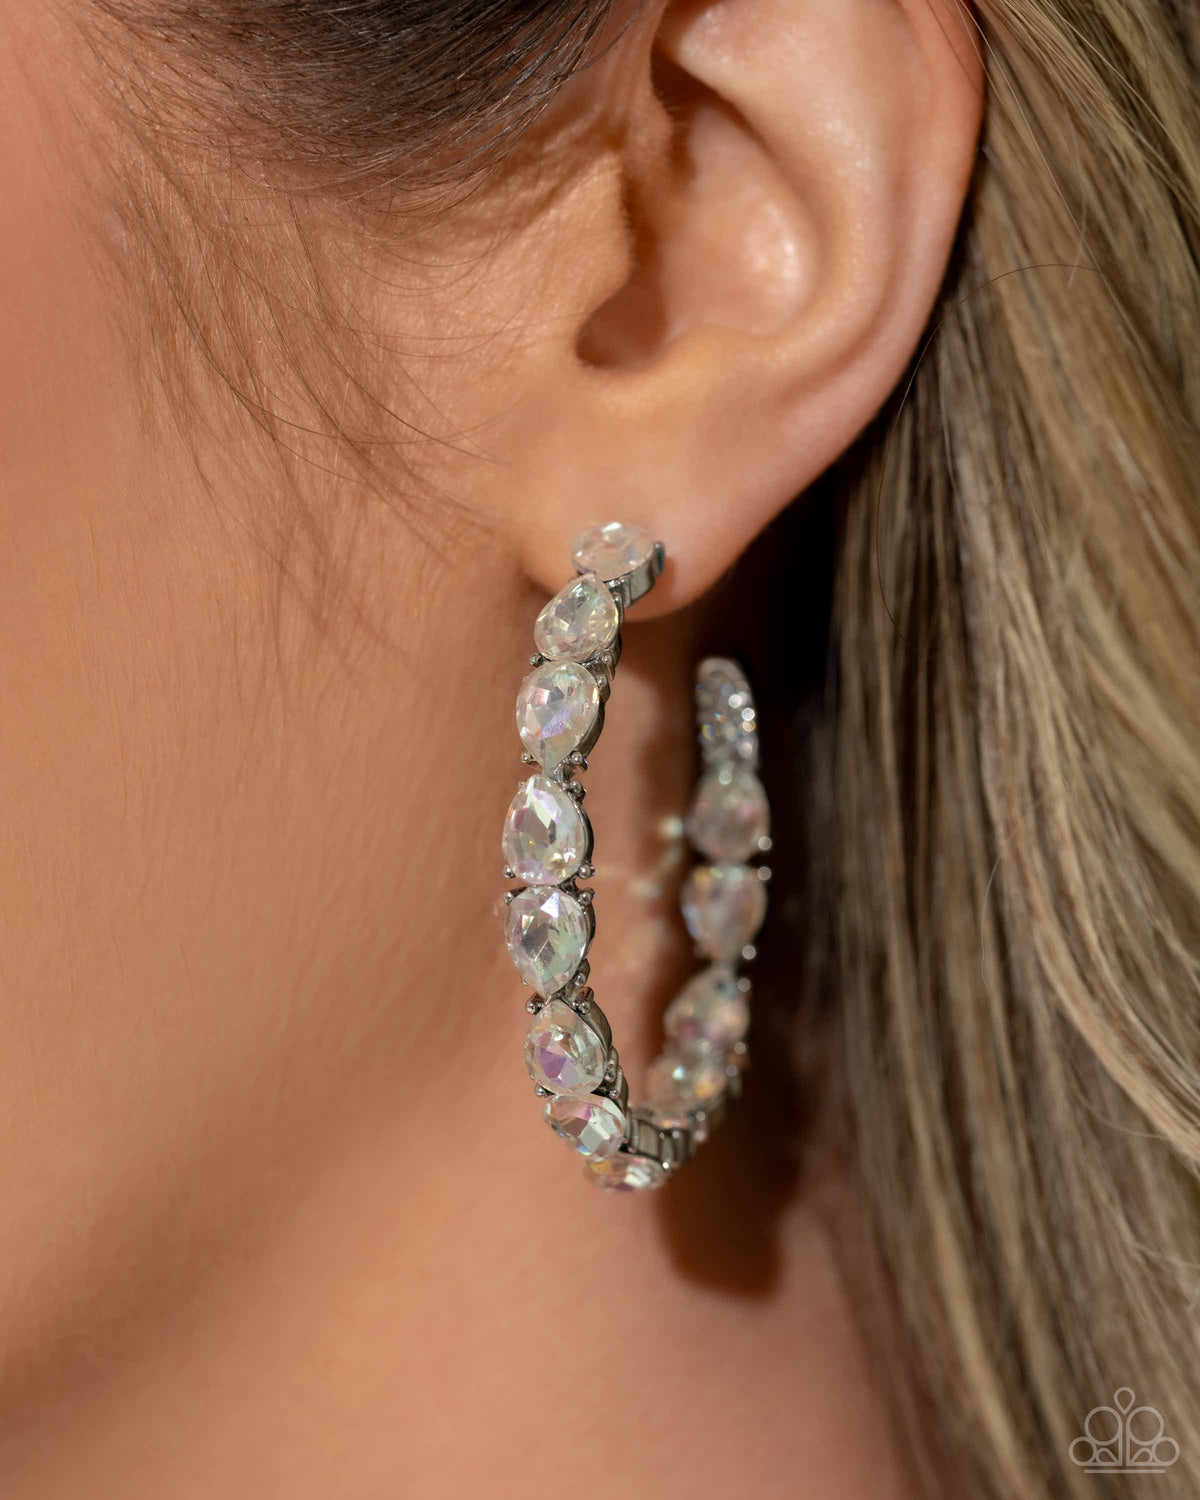 Presidential Pizzazz White Rhinestone Hoop Earrings - Paparazzi Accessories-on model - CarasShop.com - $5 Jewelry by Cara Jewels